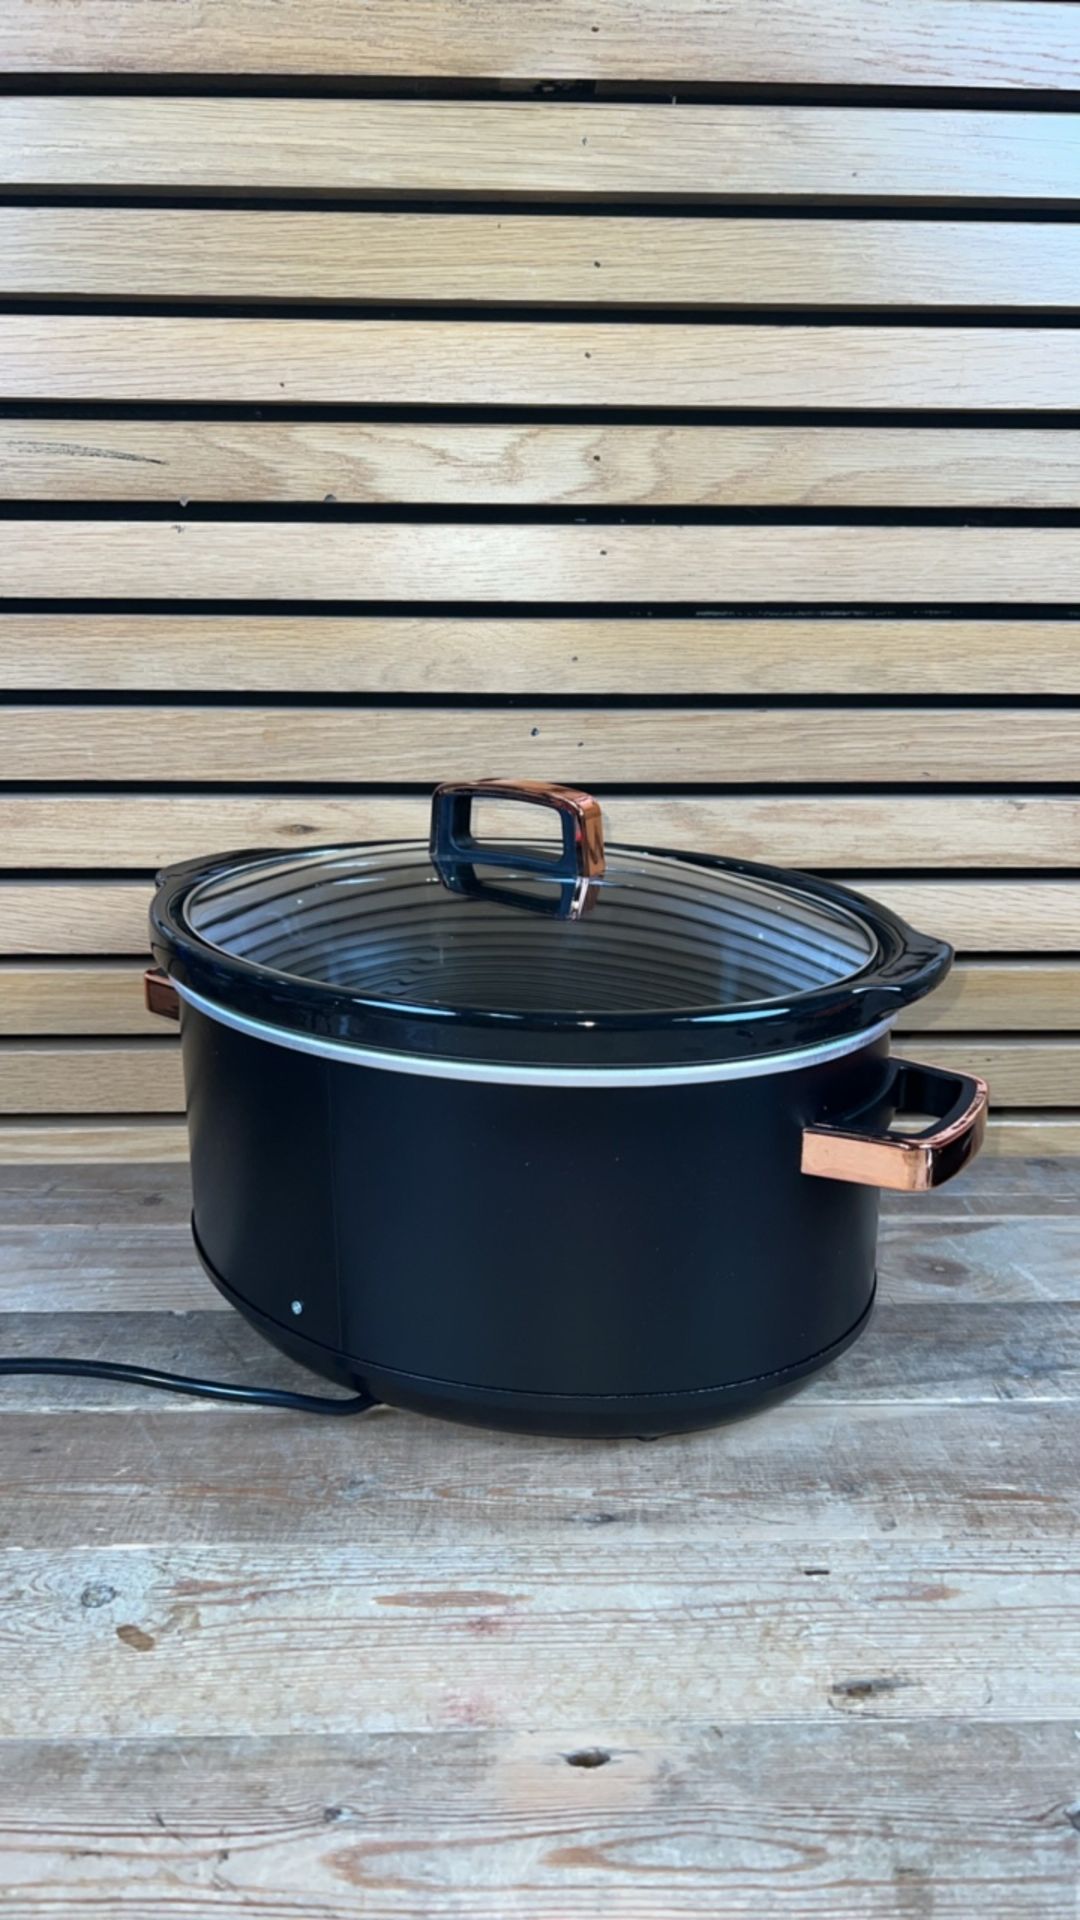 Tower Cavaletto Rose Gold Edition 6.5Litre Black Slow Cooker - Image 2 of 4